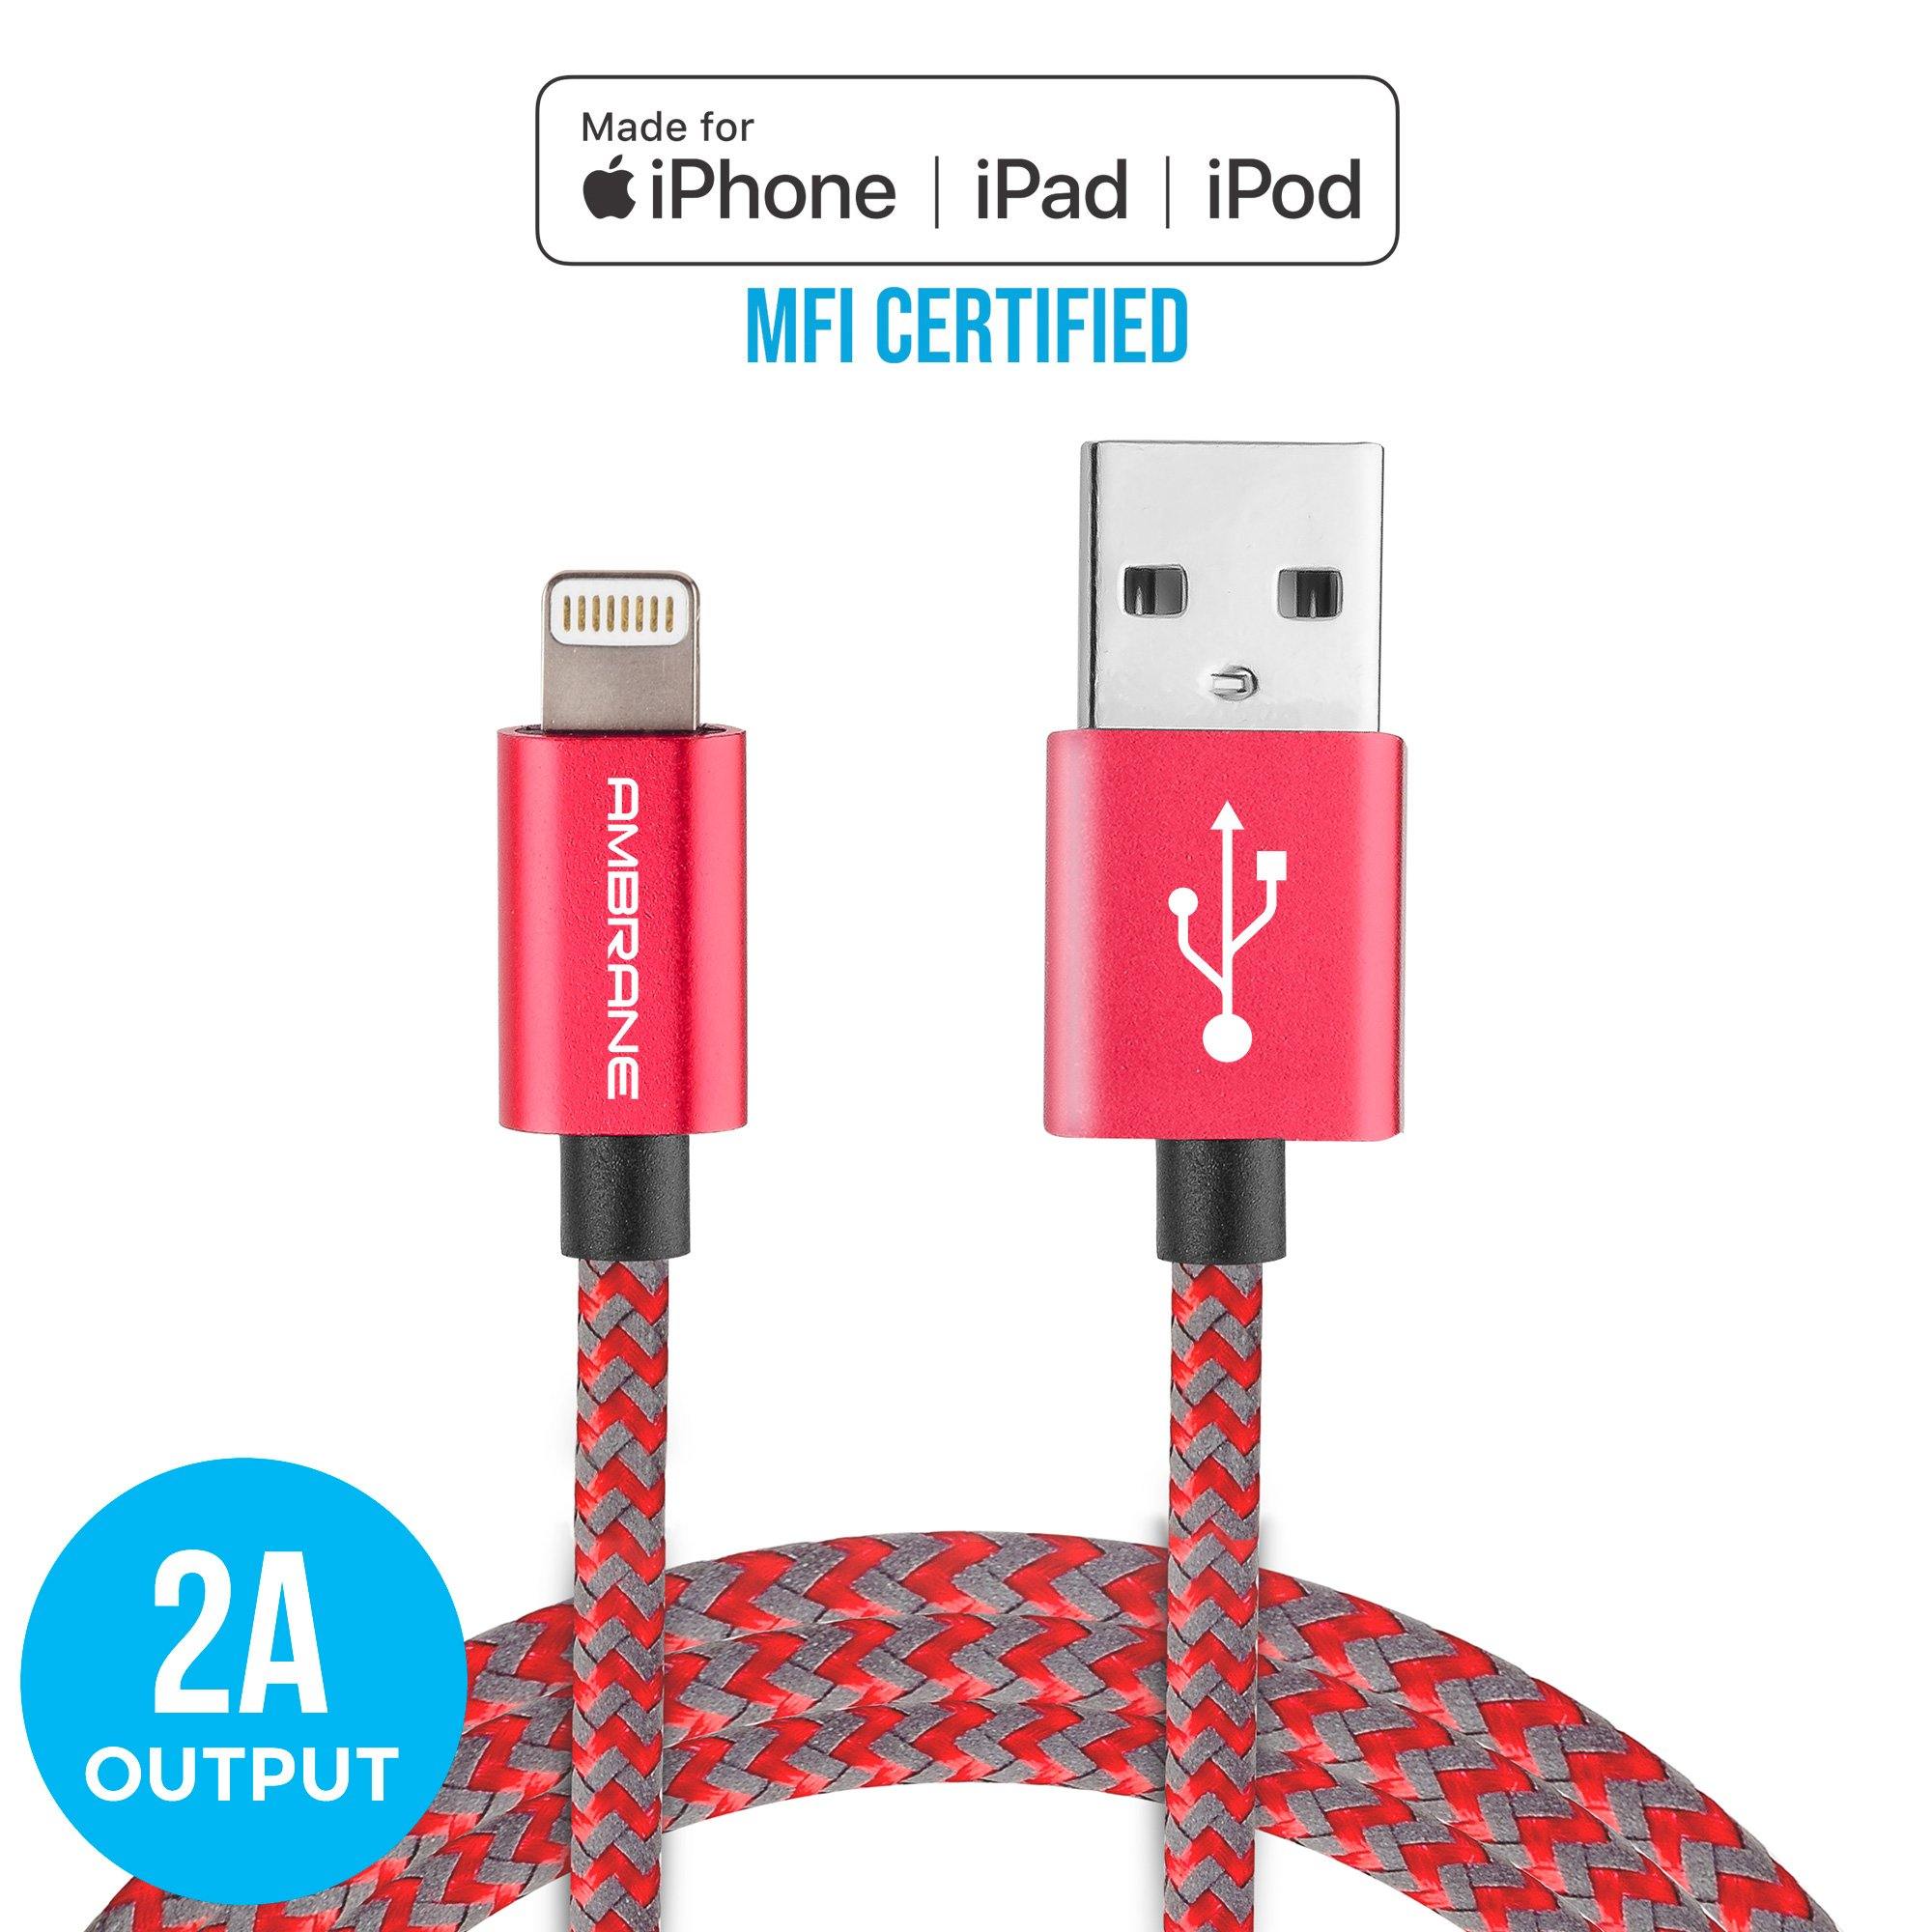 AMC-11 iPhone Lightning Cable - 1 Meter (Red & Grey) - AmbraneIndia